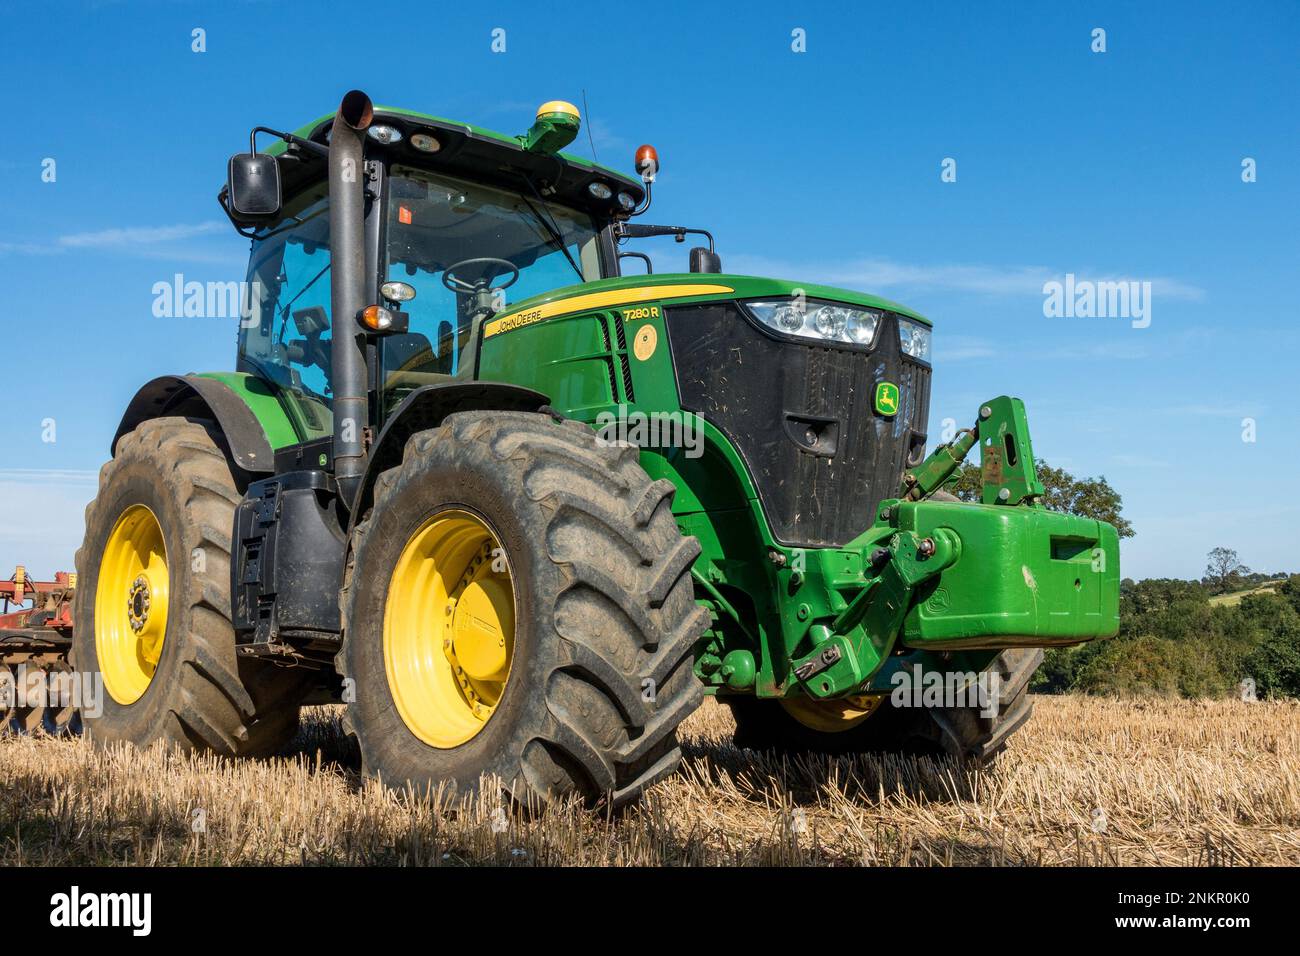 Large, bright green, John Deere 7280R row crop farm tractor with big fat tyres and with disk harrow behind parked in Leicestershire field, England, UK Stock Photo